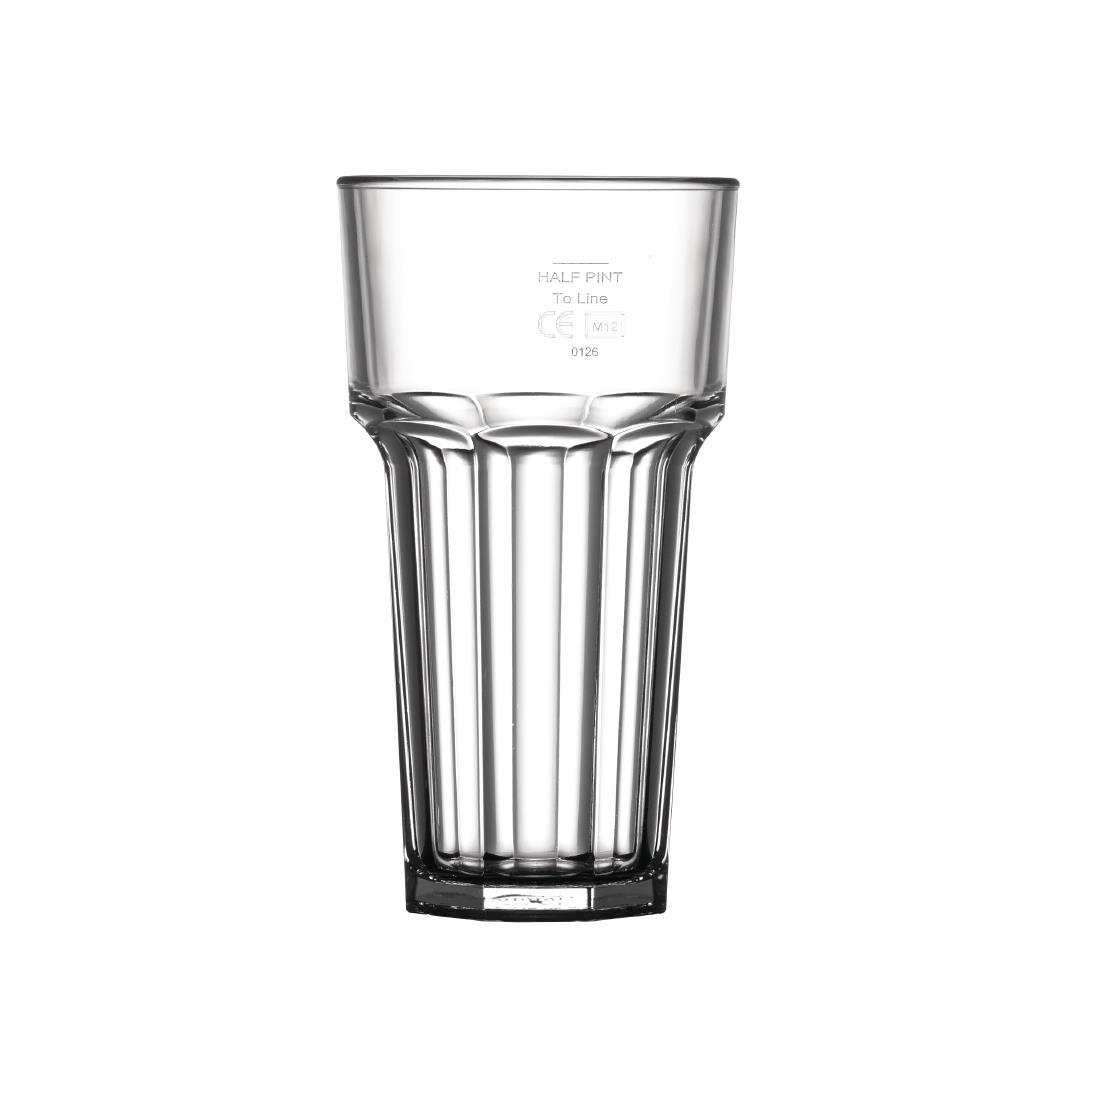 BBP Polycarbonate American Hi Ball Glasses Lined Half Pint CE Marked at 285ml - U408  - 1